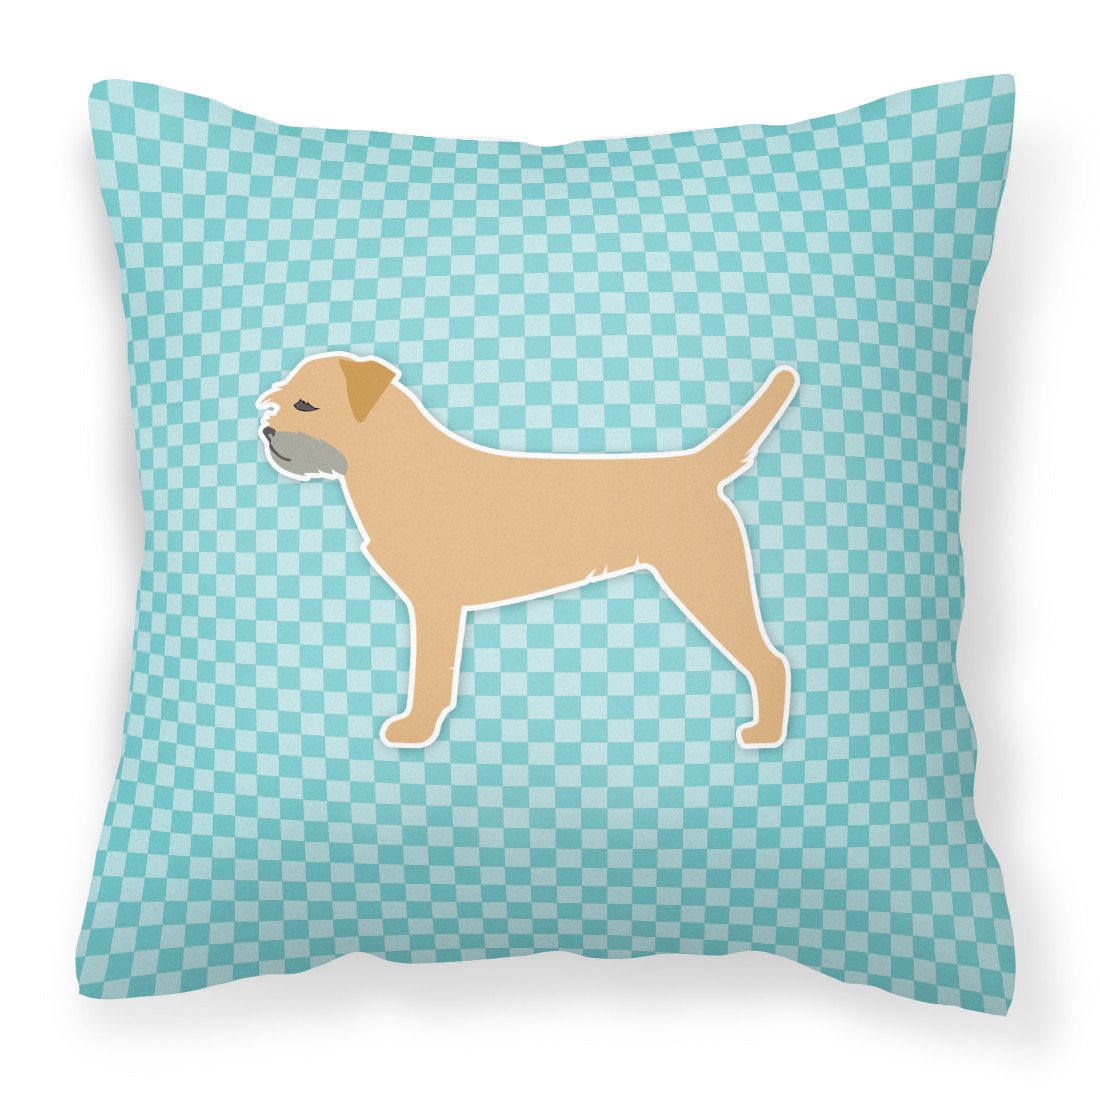 Border Terrier  Checkerboard Blue Fabric Decorative Pillow BB3689PW1818 by Caroline's Treasures